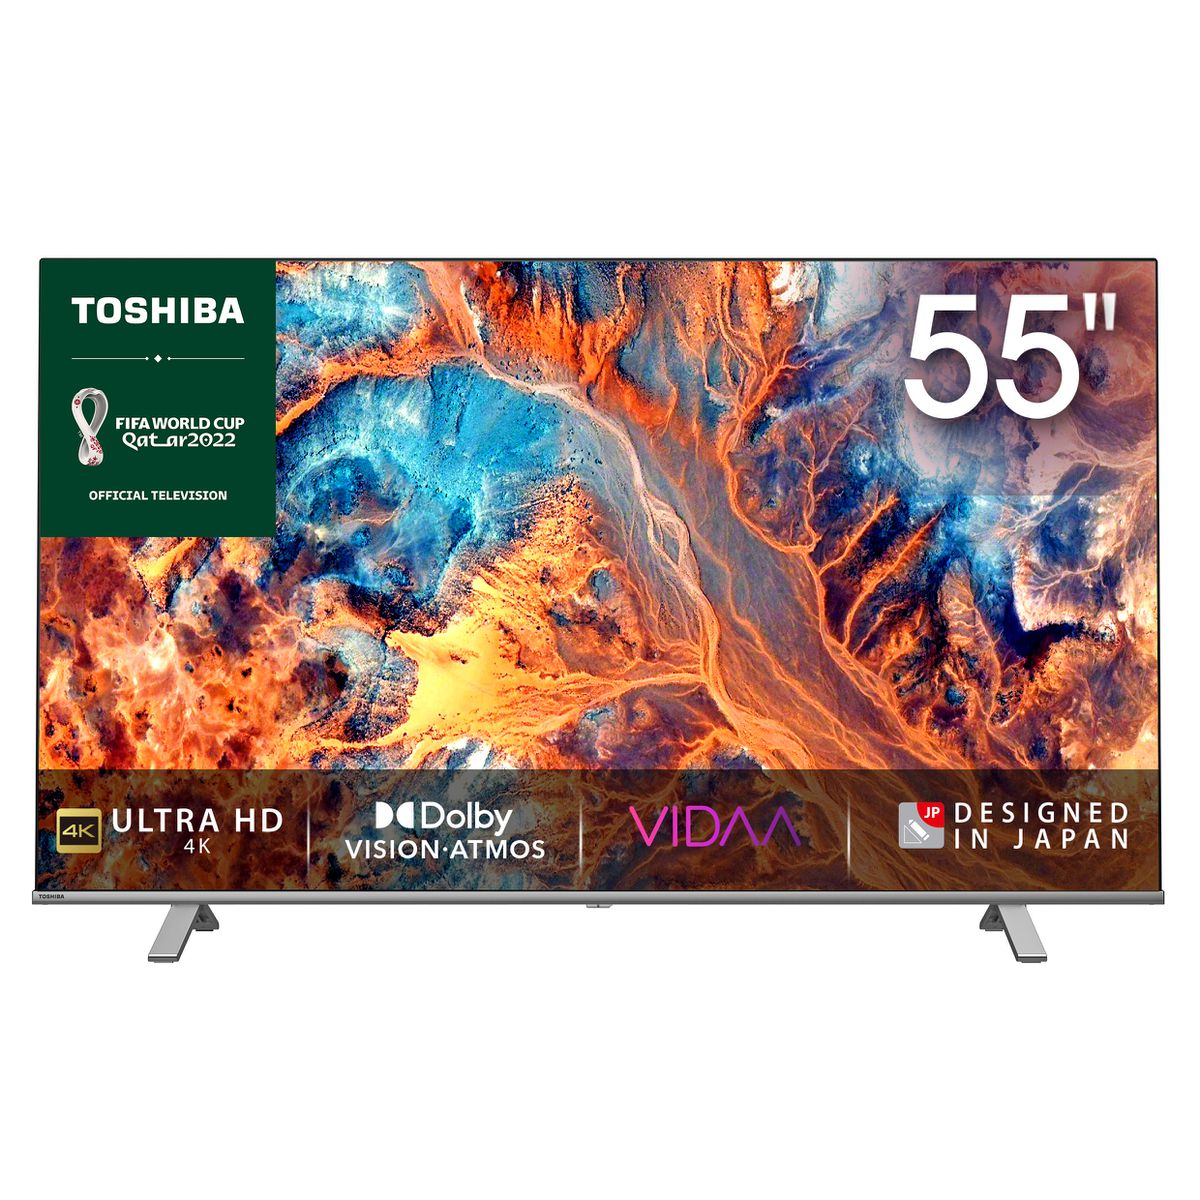 Toshiba 55 C350 4K UHD Smart LED TV with HDR & Dolby Atmos Buy Online in Zimbabwe thedailysale.shop